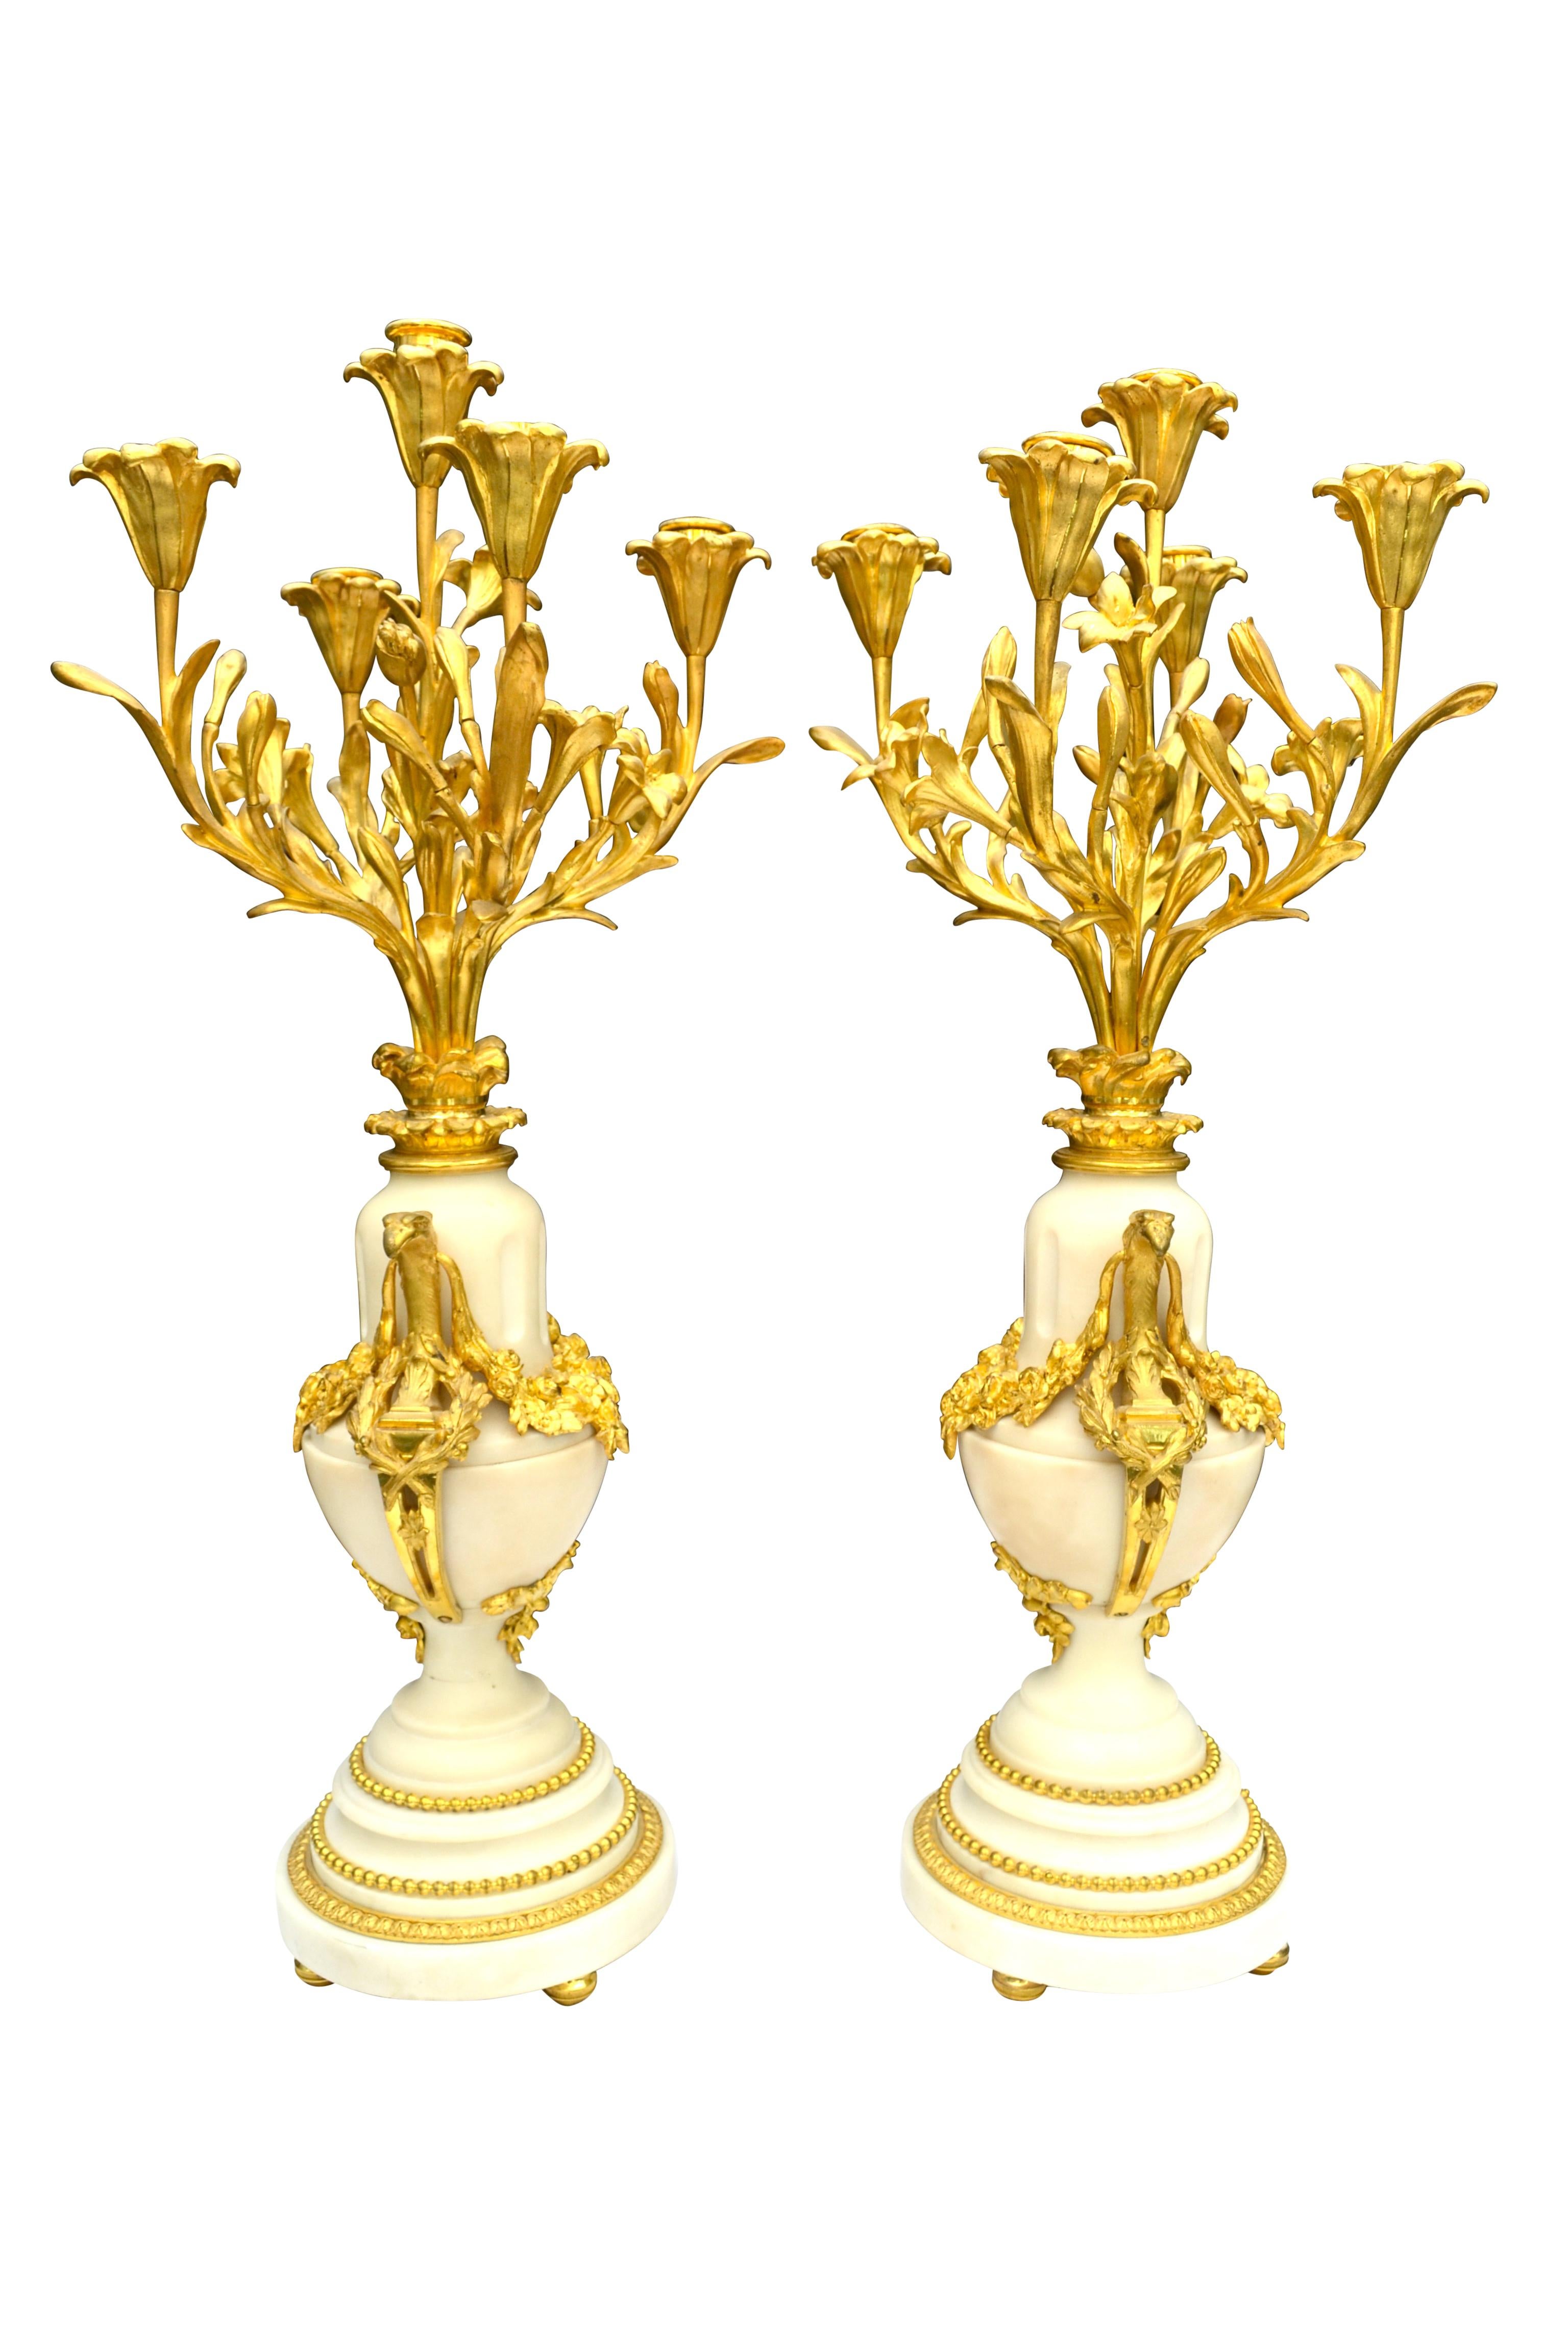 French Pair of Louis XVI Gilt Bronze and White Marble Five-Arm Candelabra For Sale